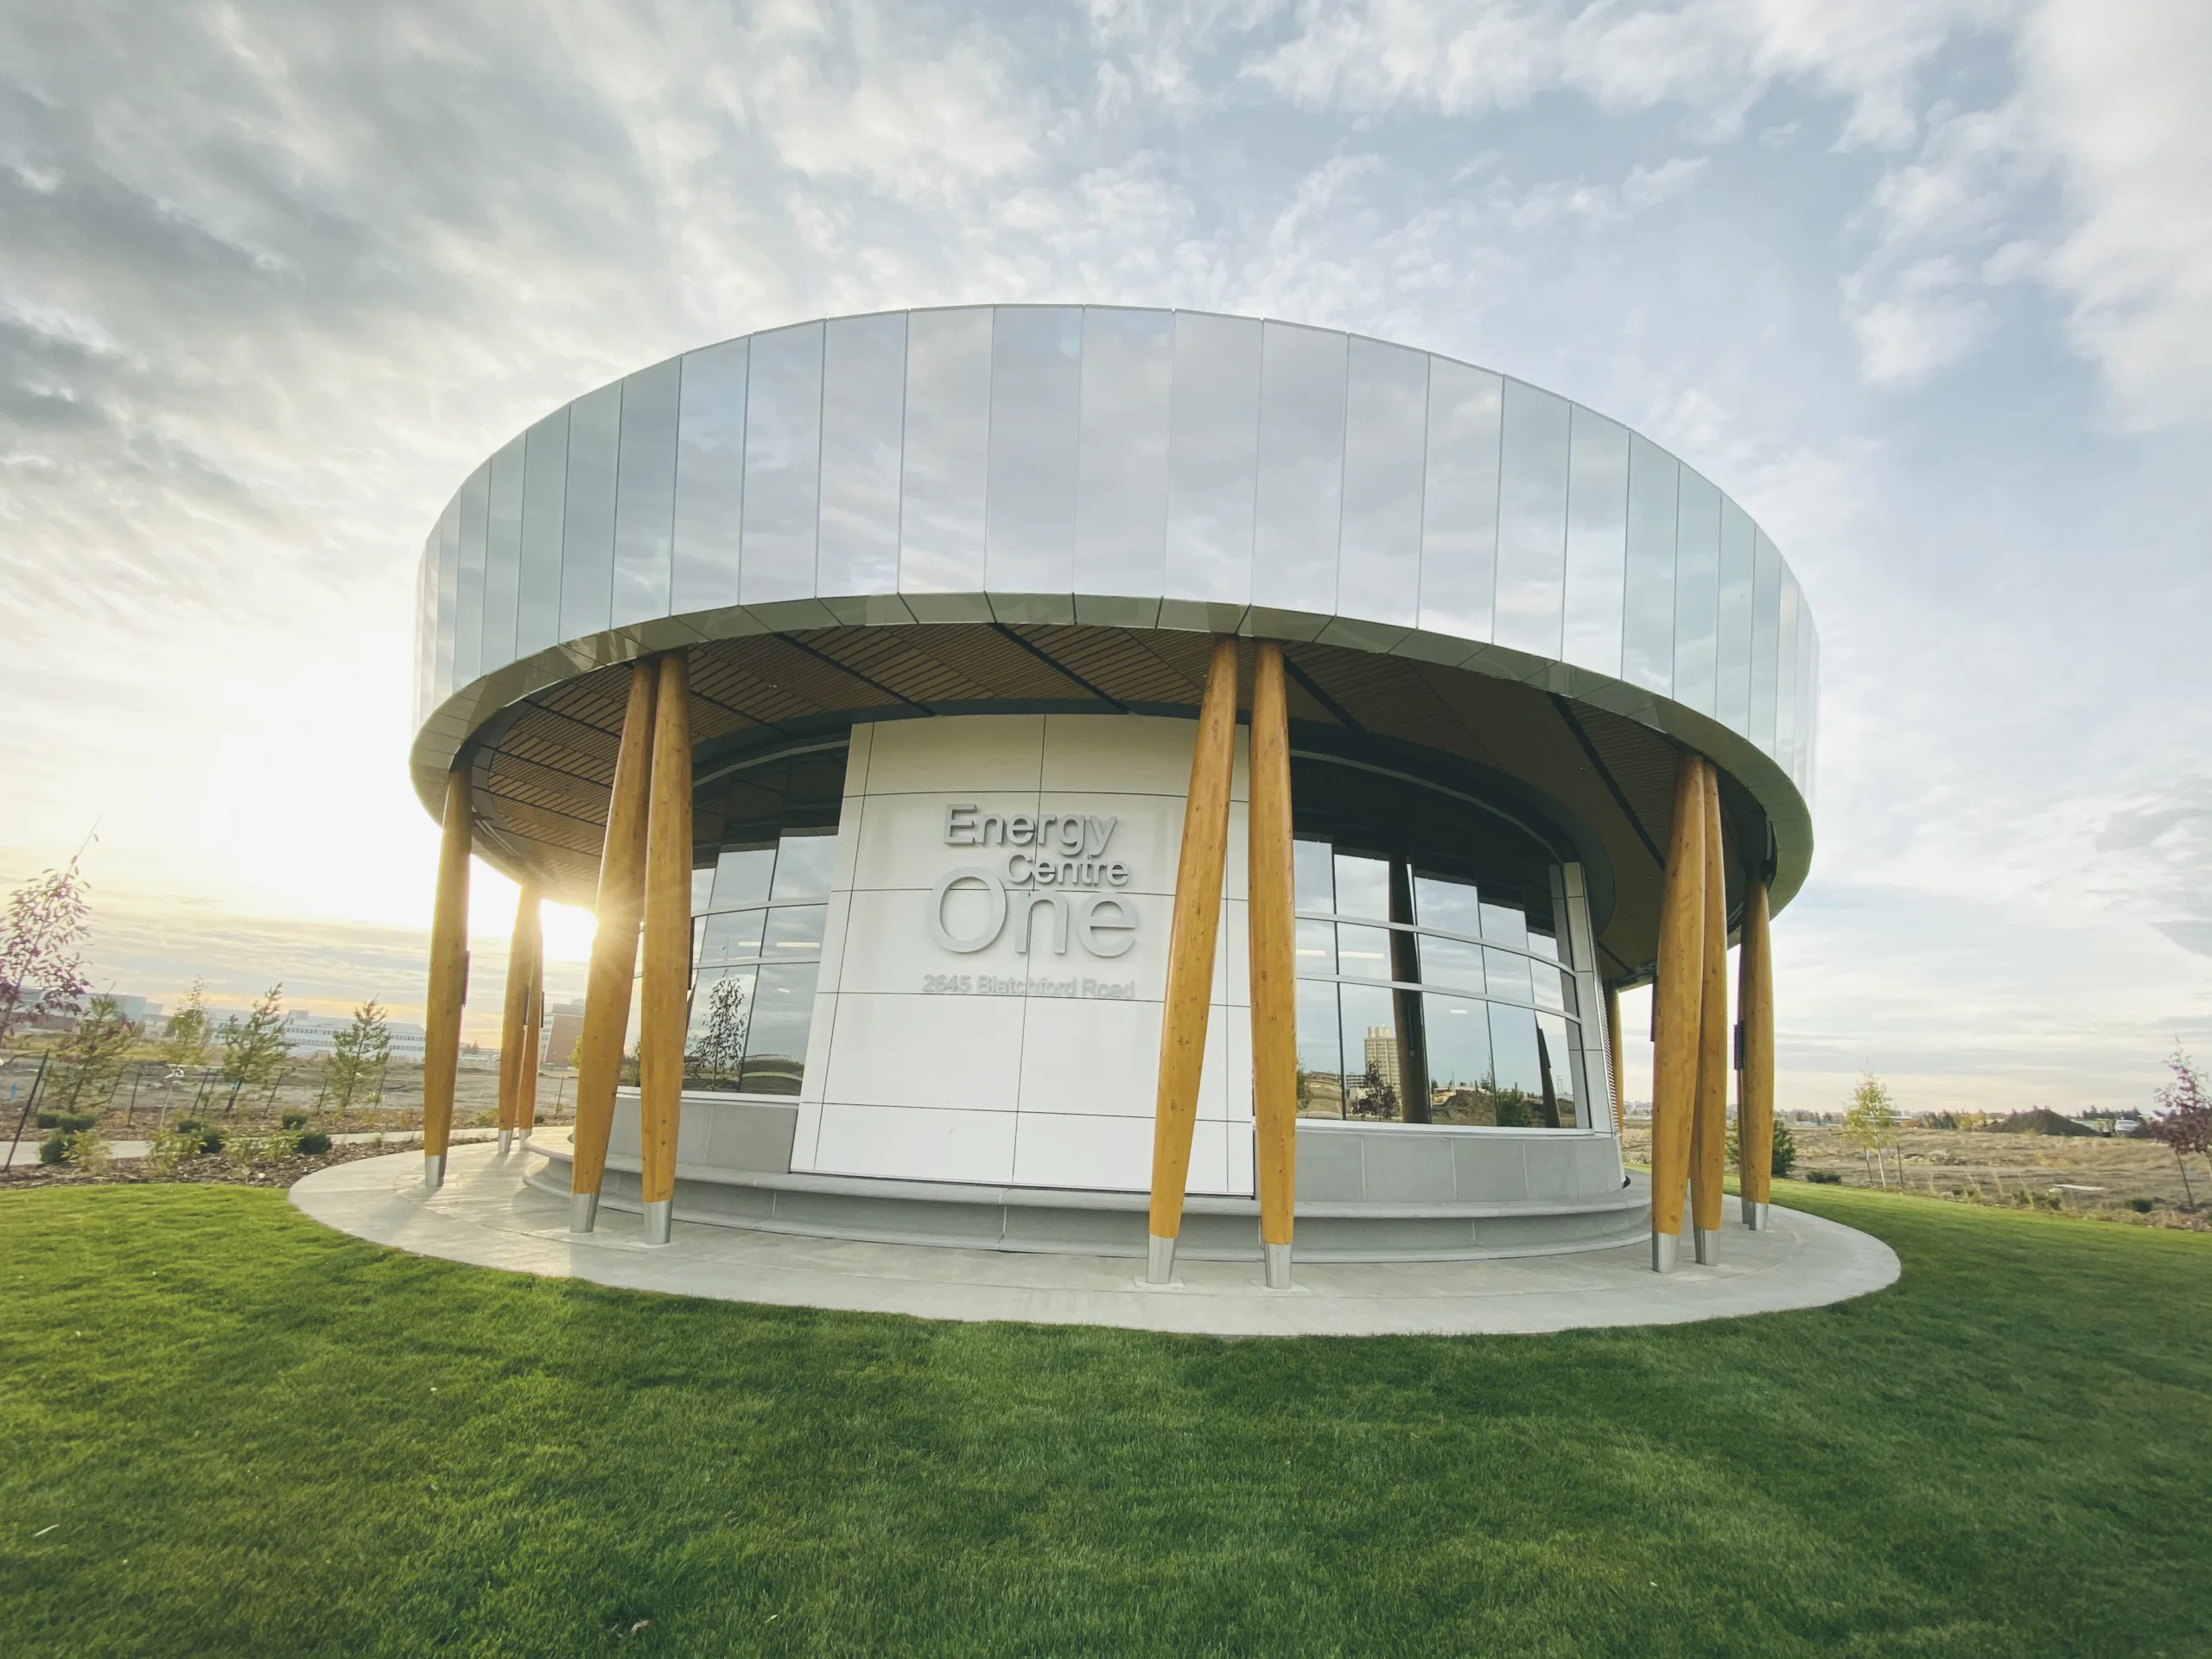 Blatchford’s Energy Centre One – Designing a building for sustainability.